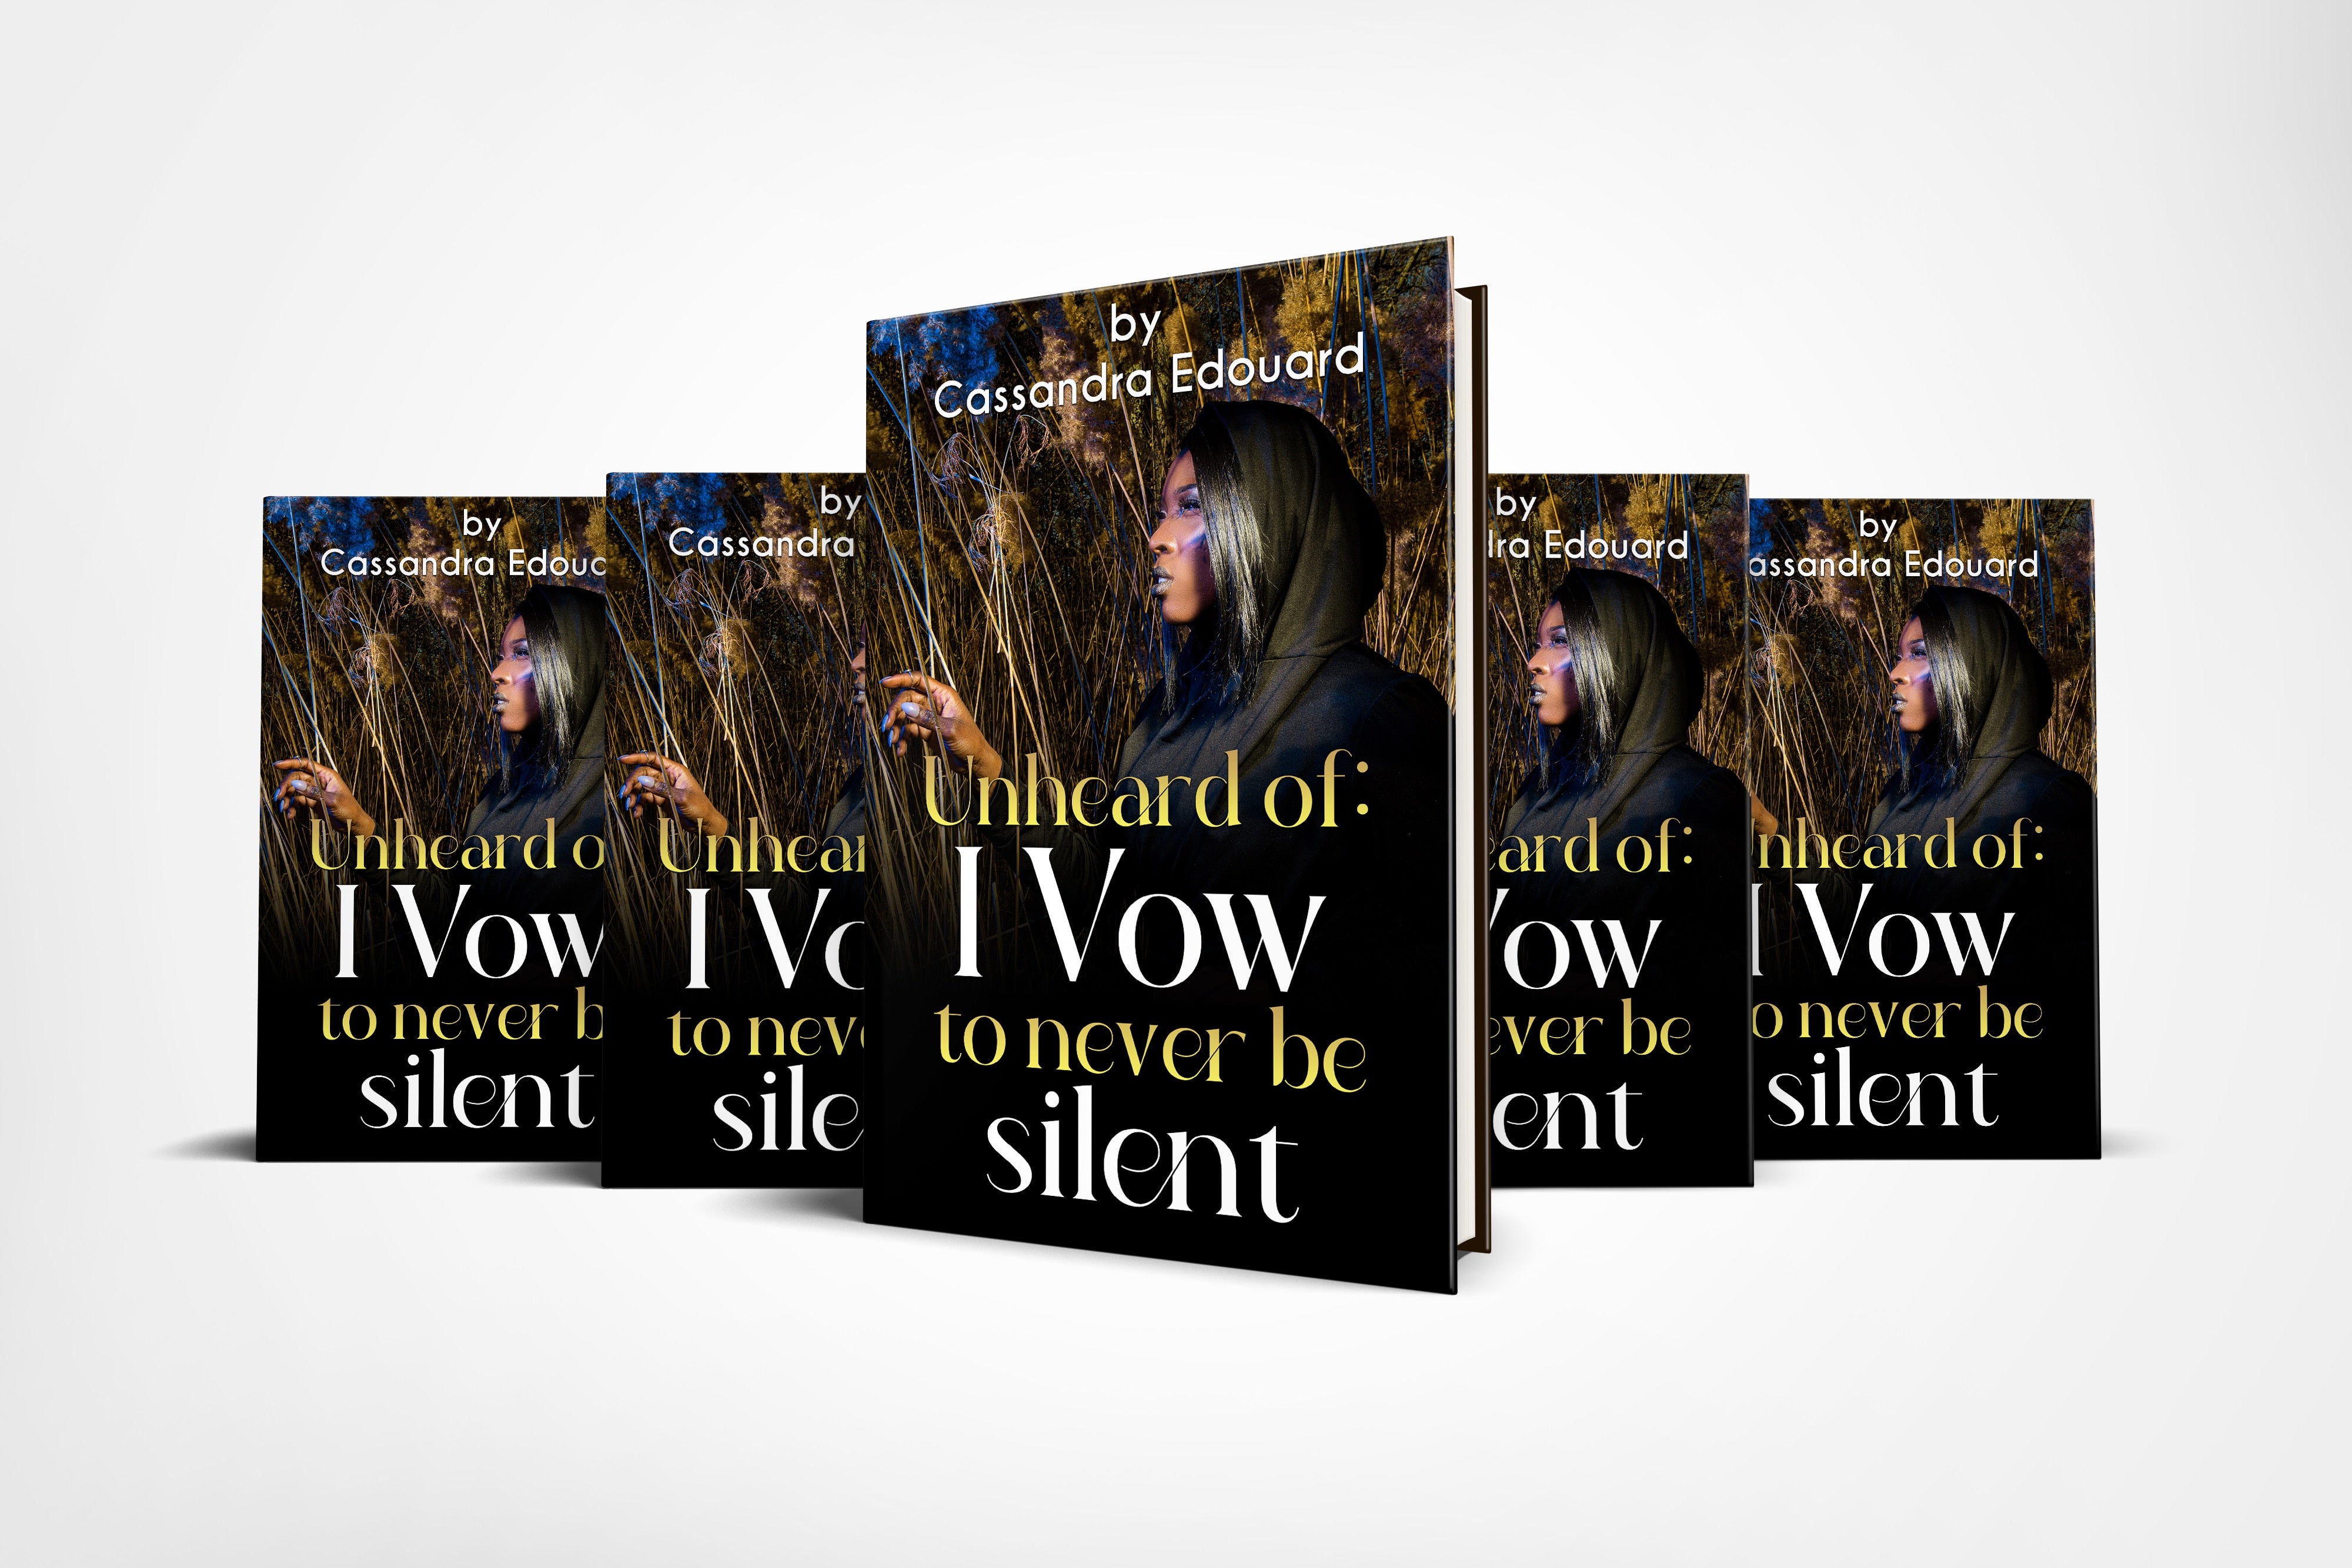 Unheard of: I vow to never be silent book